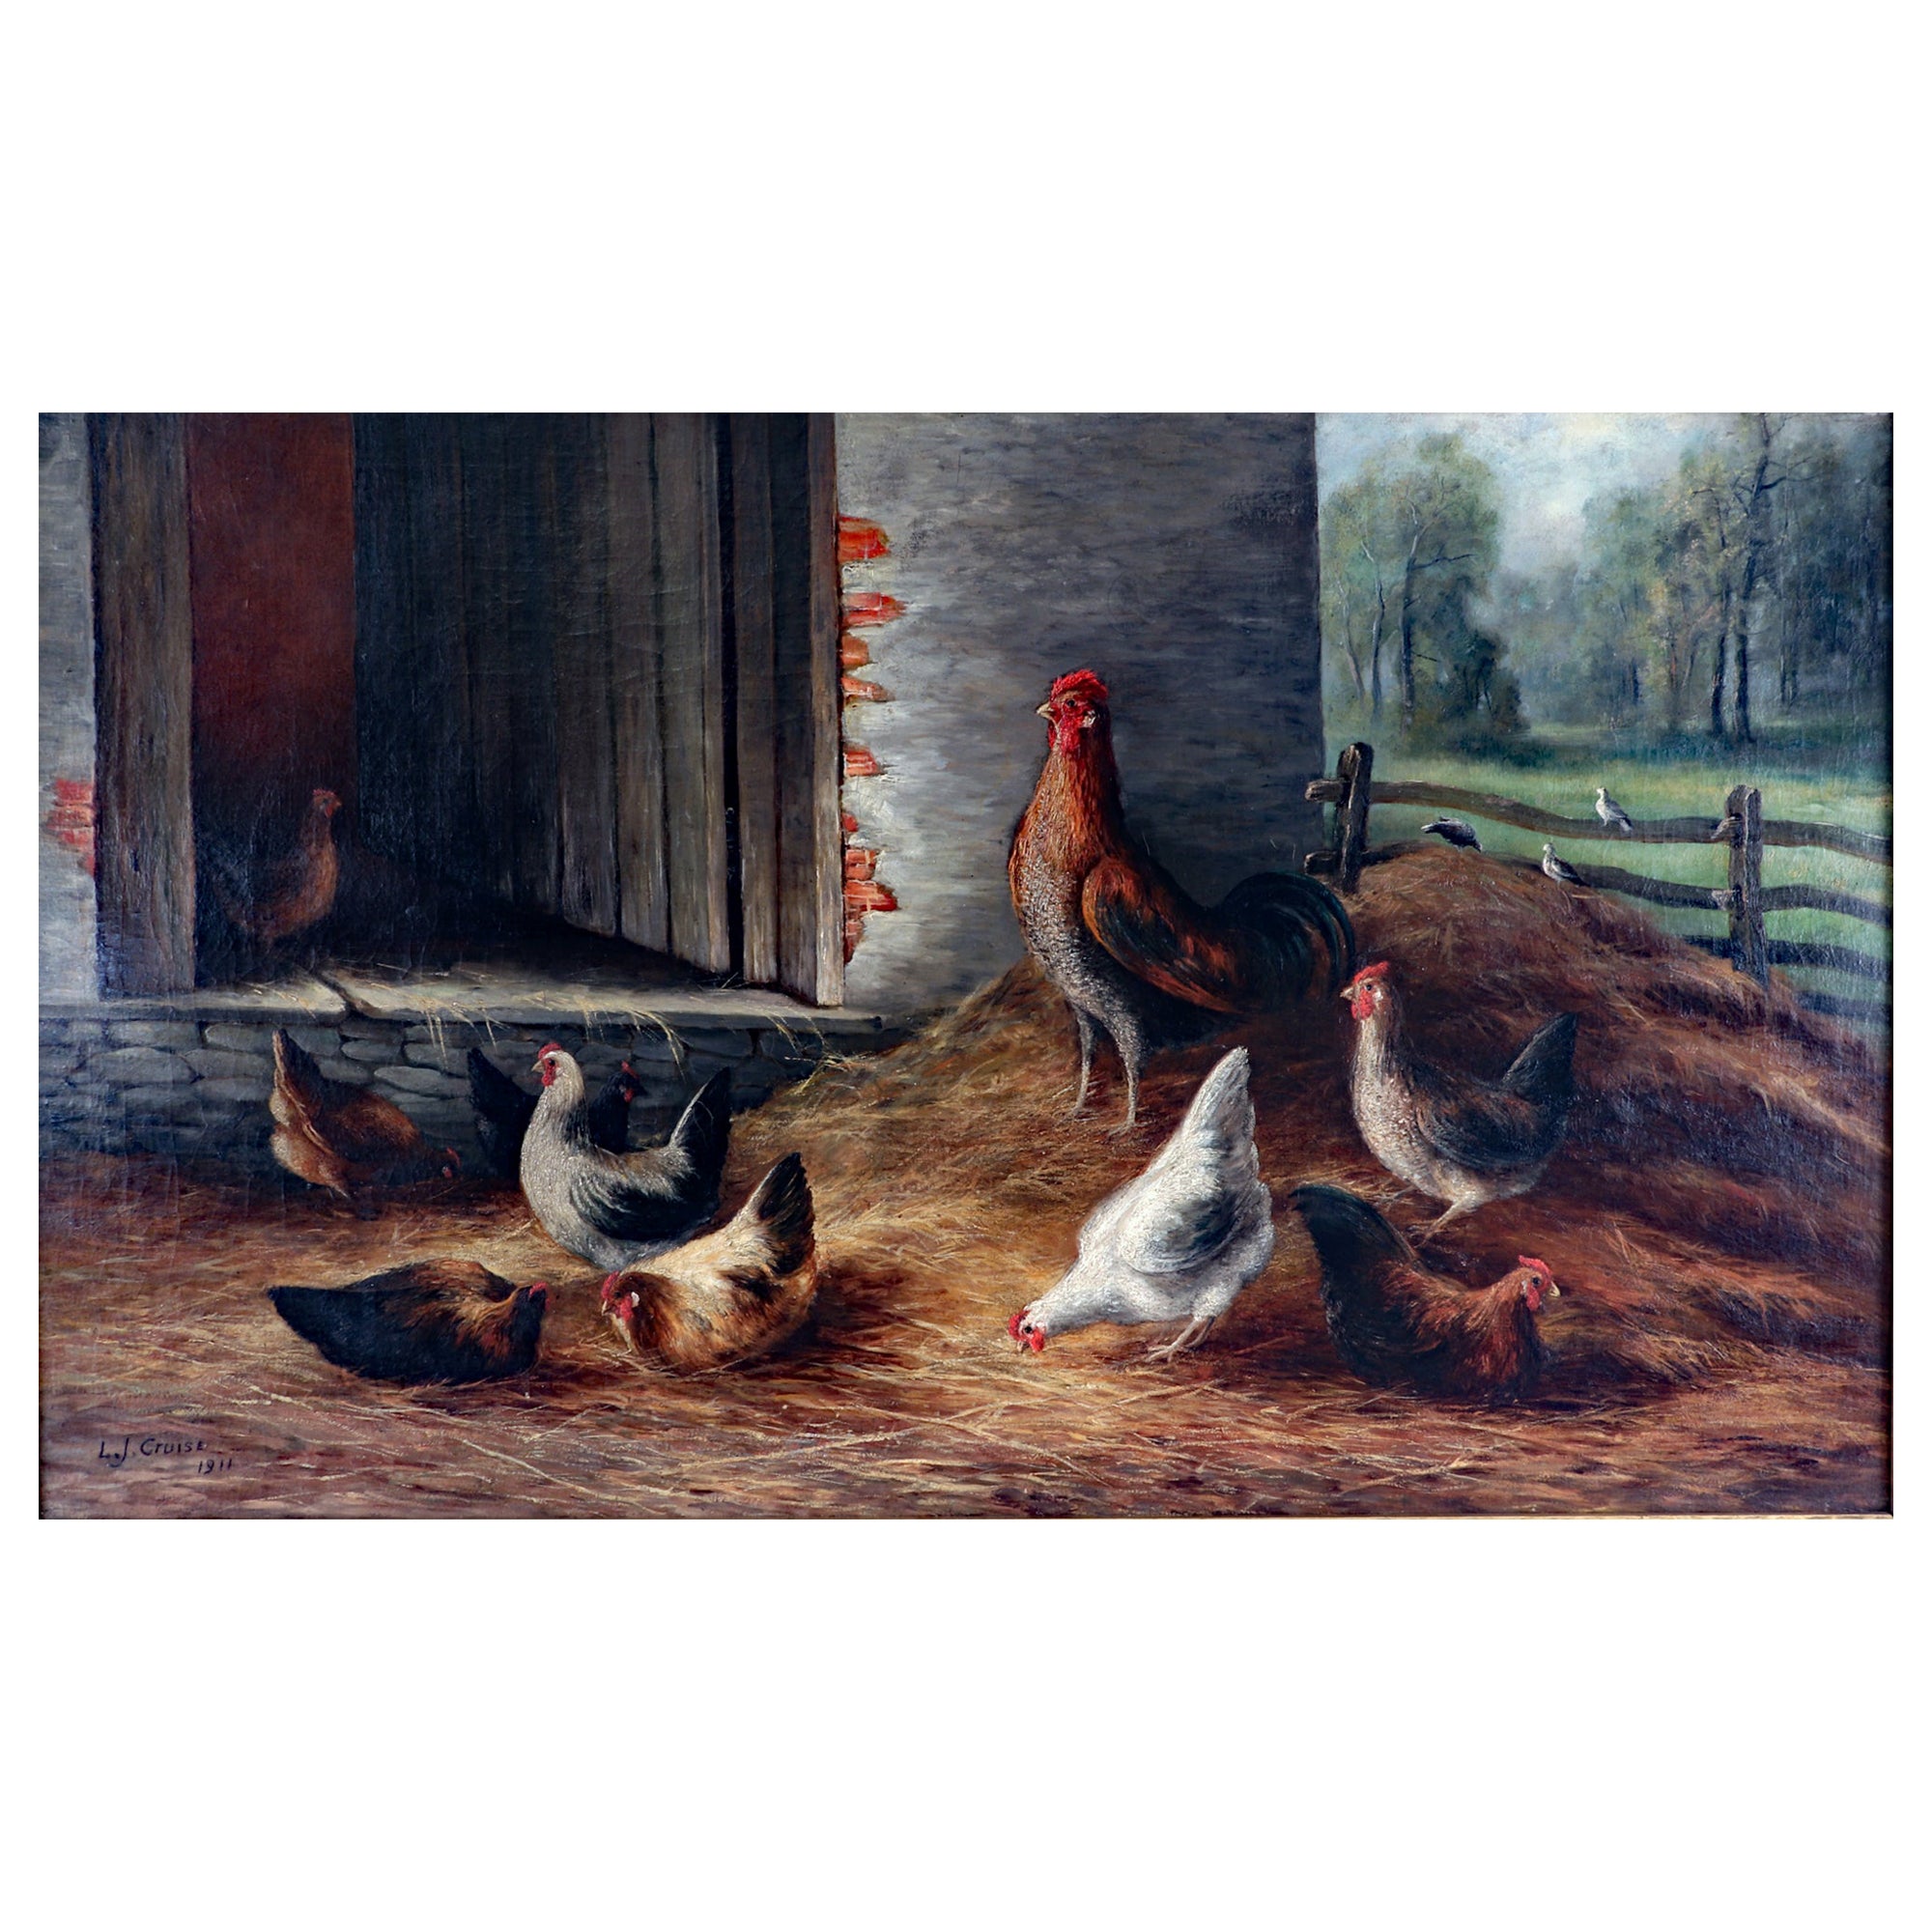 Painting of Farmyard Scene with chickens, Oil on Canvas, Signed L.J. Cruise